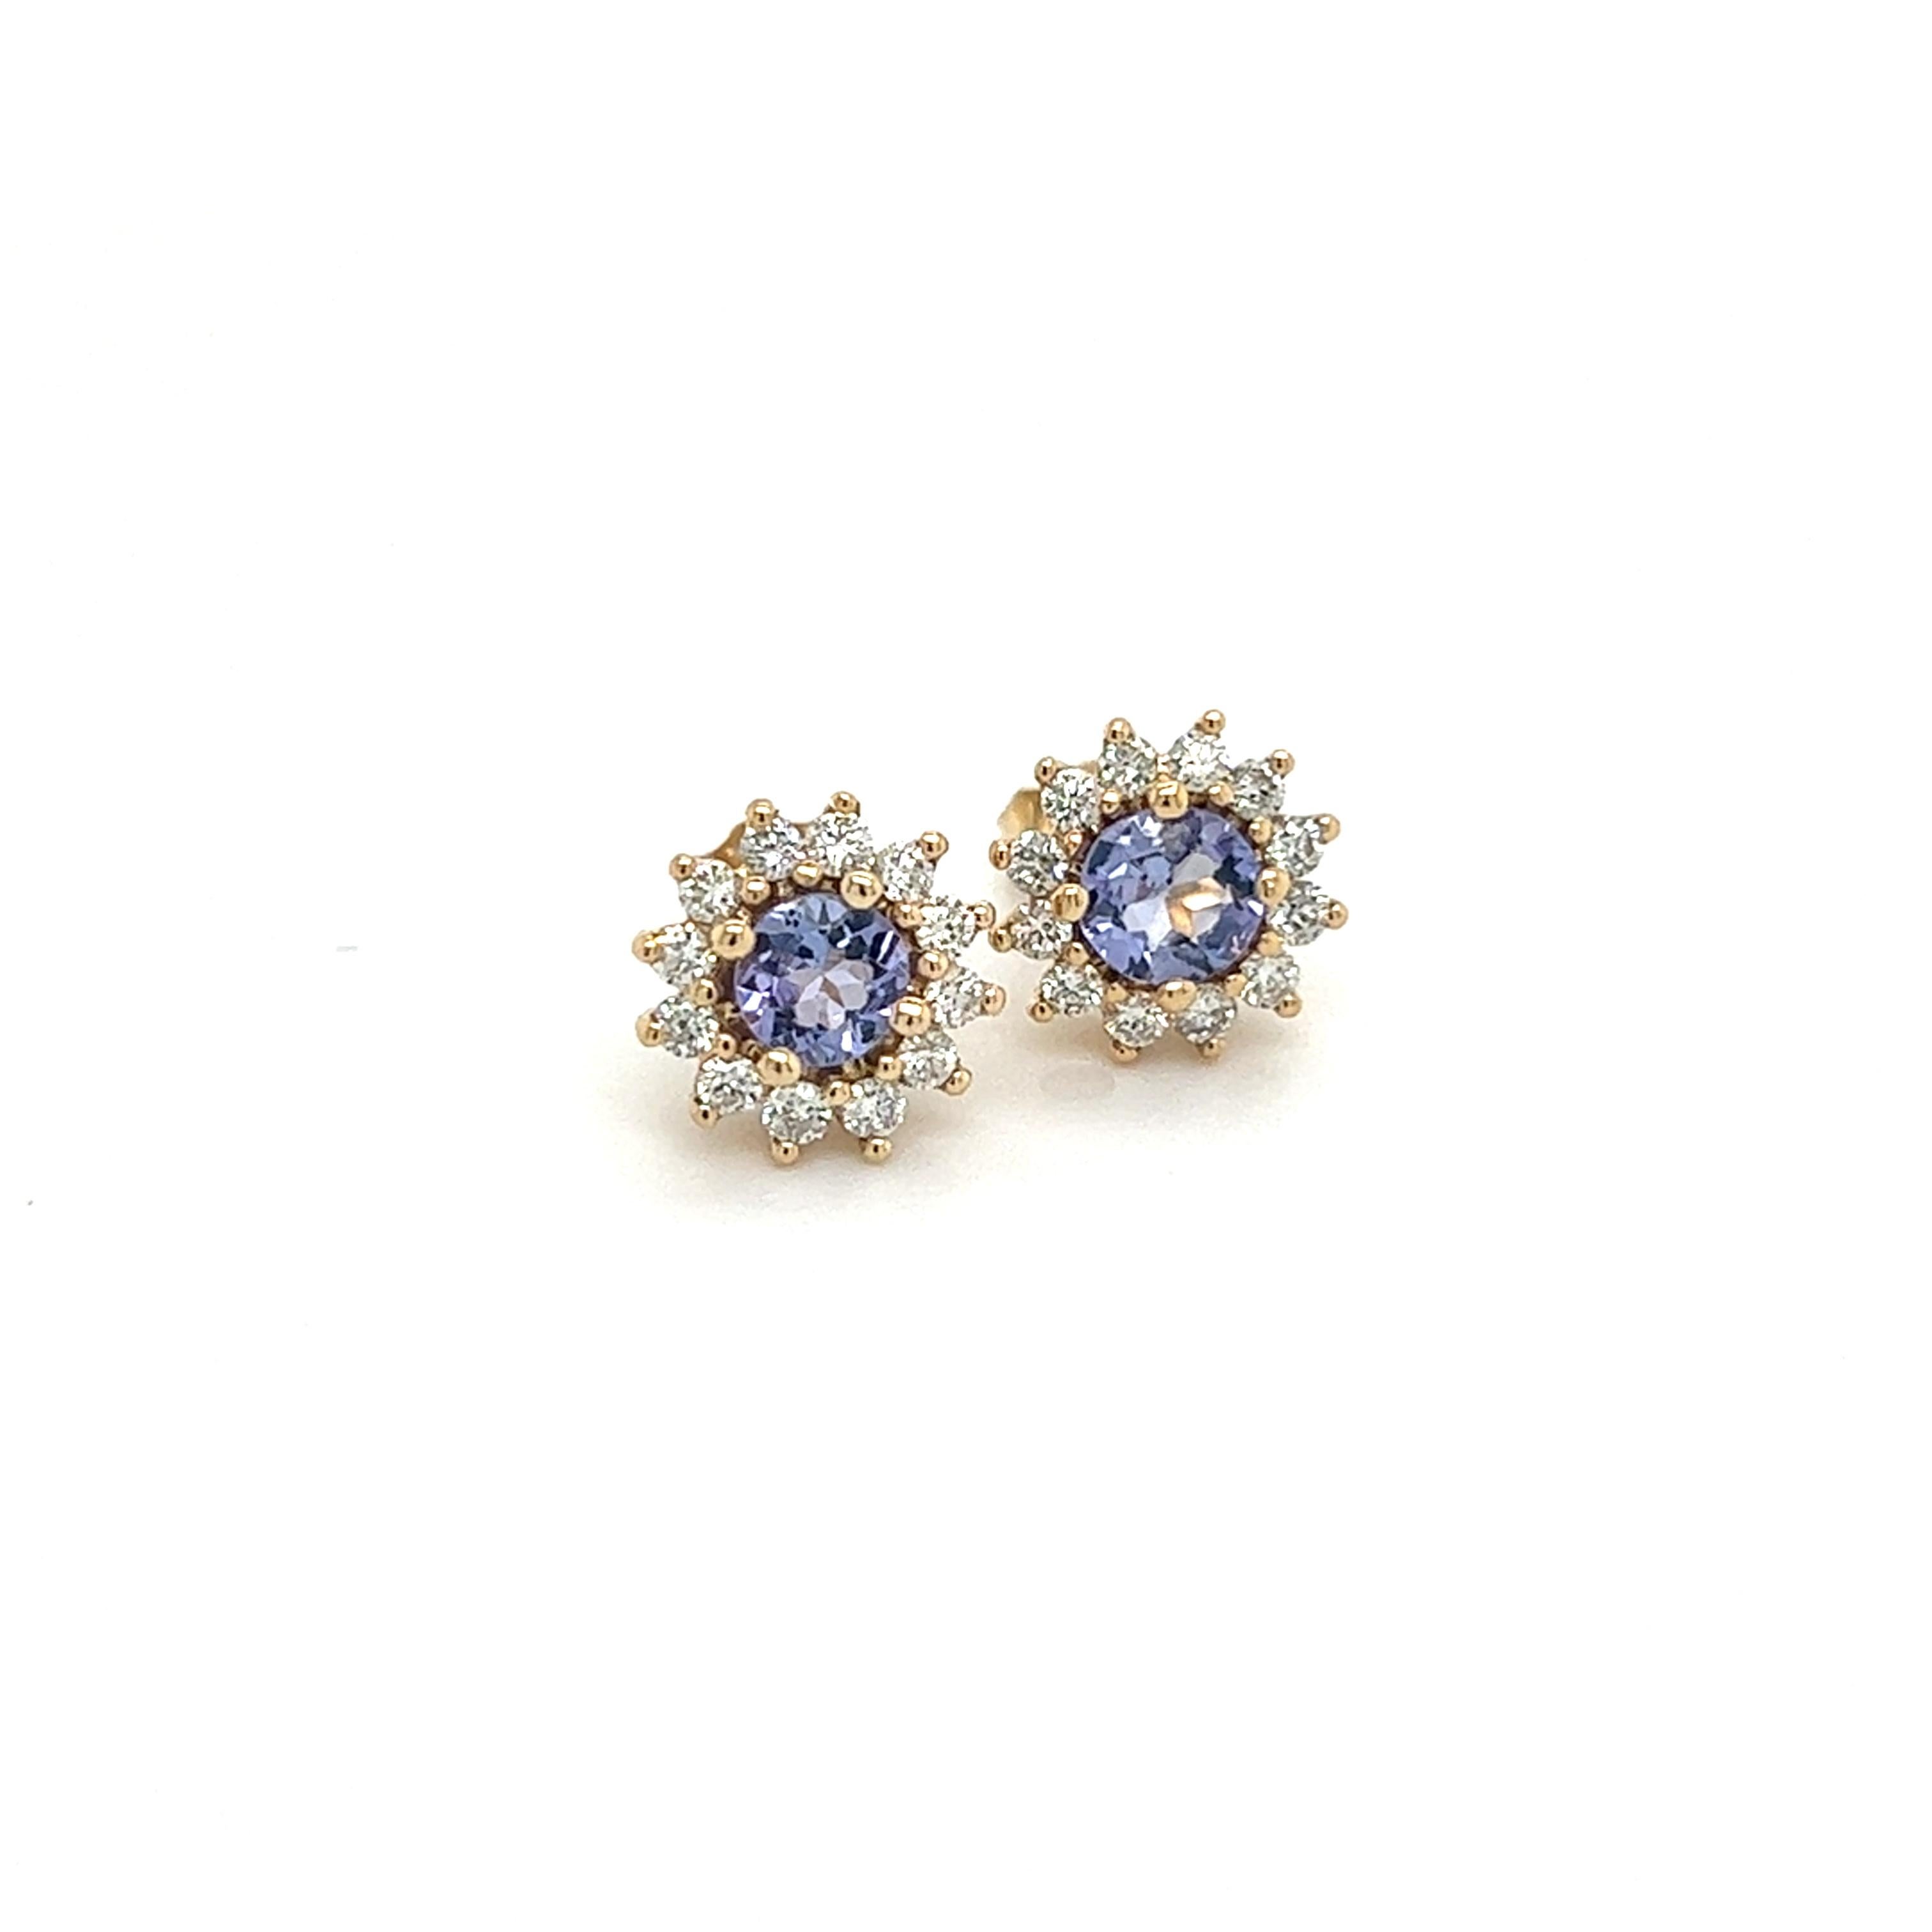 Natural Tanzanite Diamond Stud Earrings 14k Y Gold 1.18 TCW Certified $3,790 211353

Please look at the video attached for this item. With the video, you can see the movement of the item and appreciate the faceting and details better.

This is a